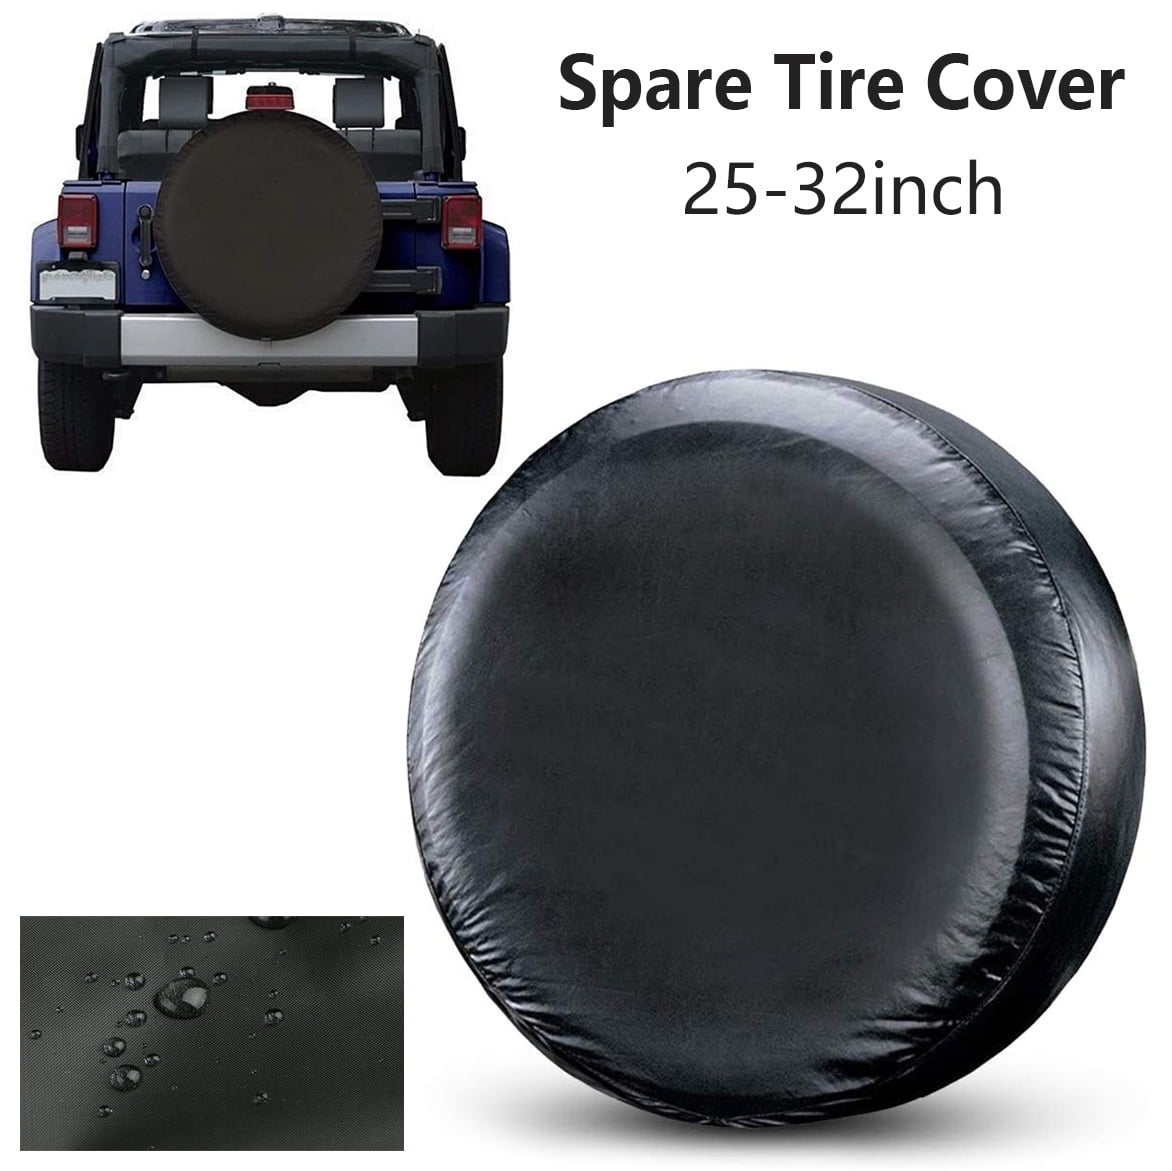 Harla Weatherproof Tire Protectors,Premium Quality Spare Wheel Tire Covers,Penguin In The Snow Tough Waterproof Spare Tire Cover Universal Fits Jeep Rv Suv Trailer Truck Camper 17 inch 